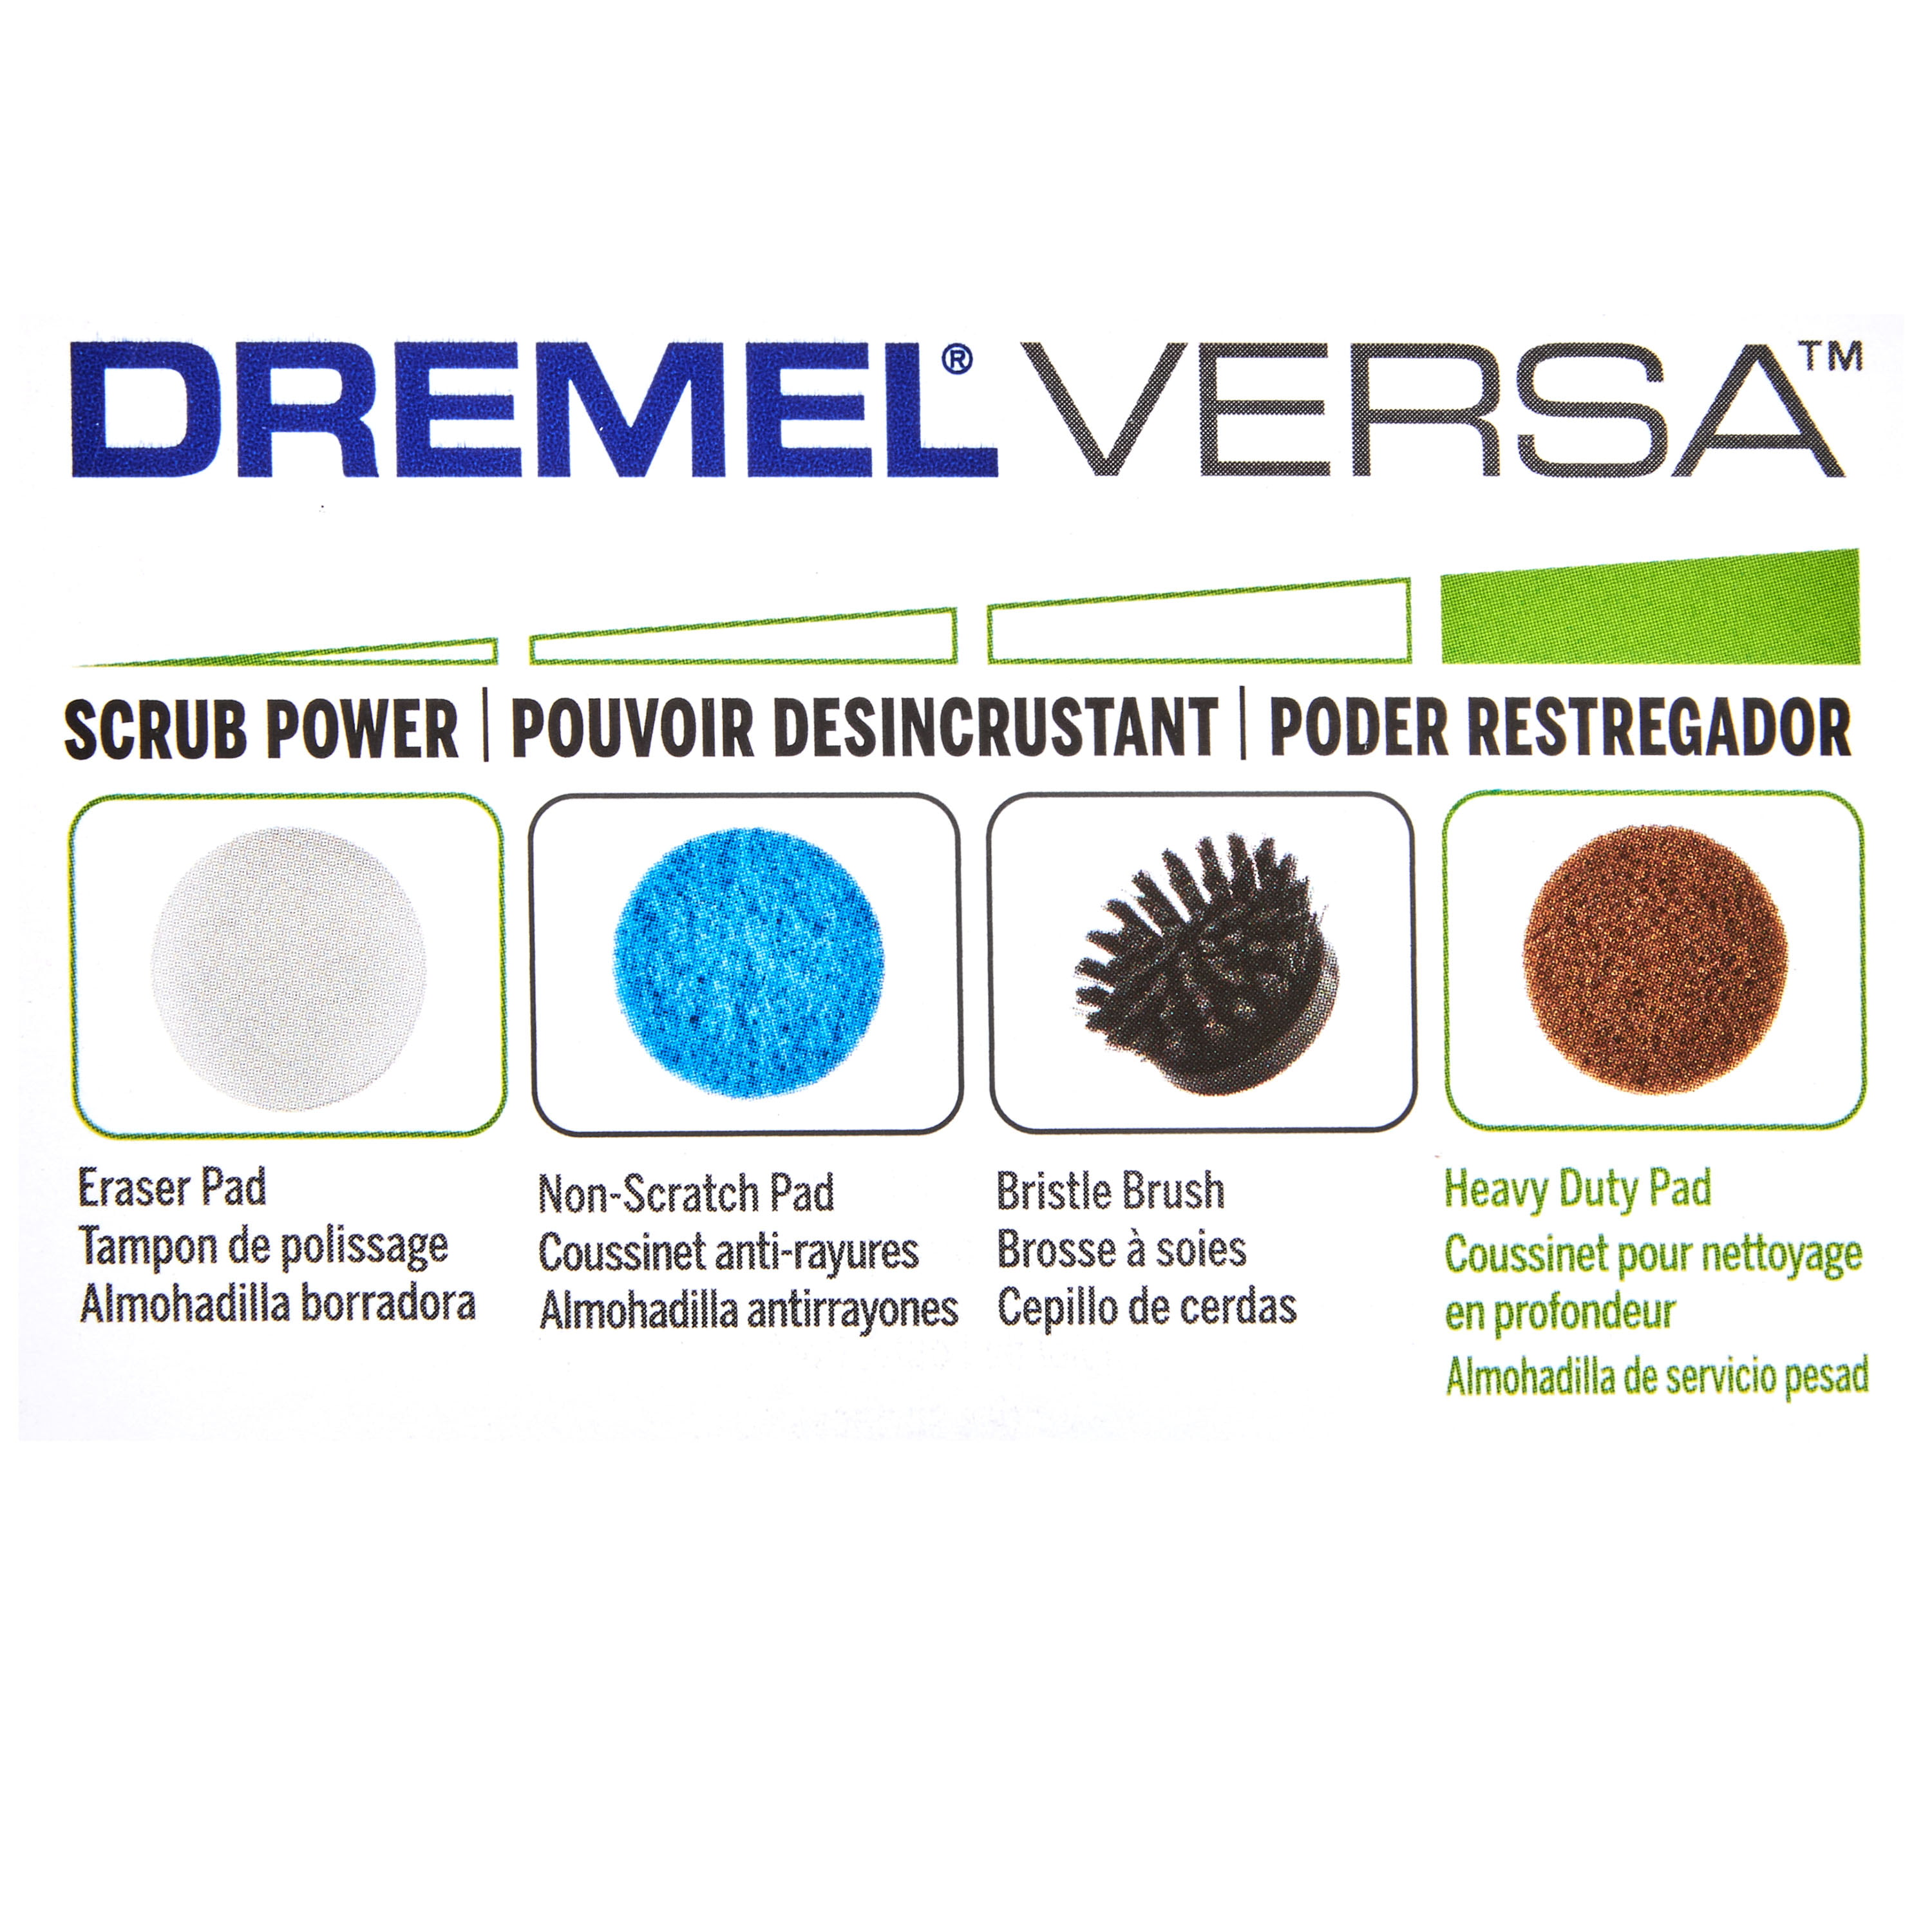 Dremel Versa Heavy Duty Pad 3 Pack PC361-3 Paint / Rust Removal - NEW  SEALED